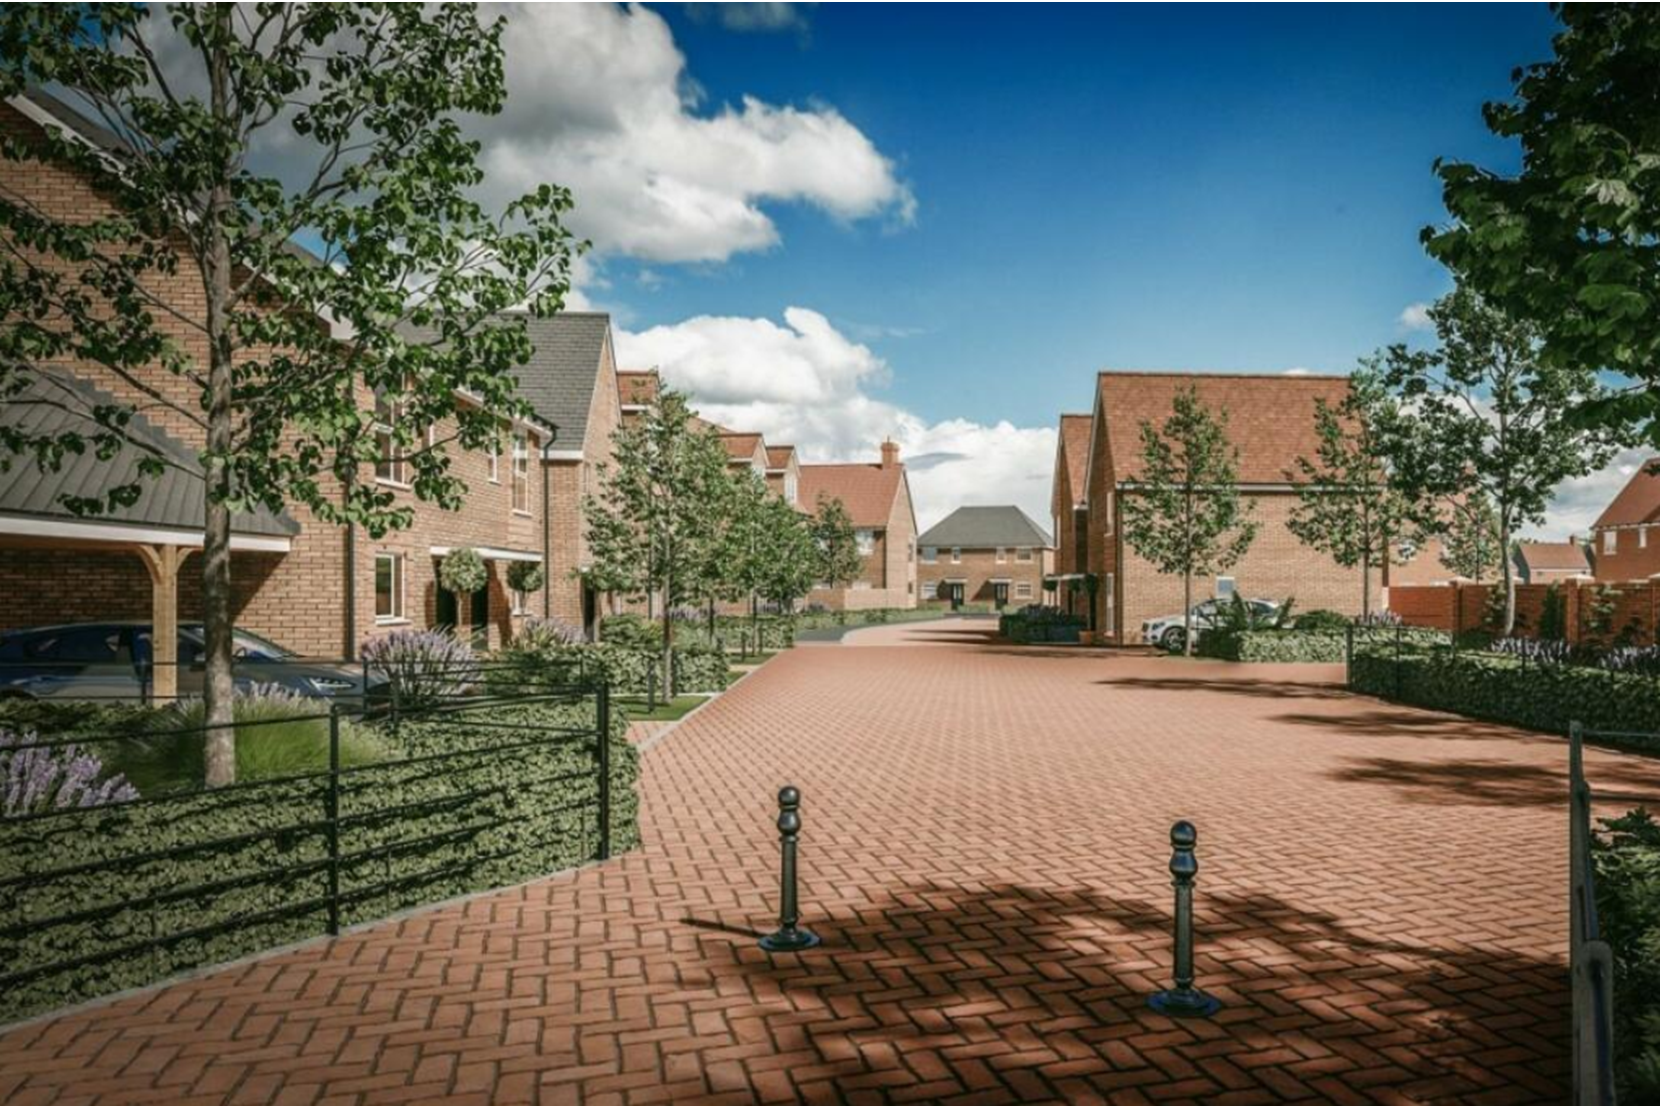 Homes to Rent by Allsop at Spinning Fields, Braintree, Essex, CM7, development panoramic CGI